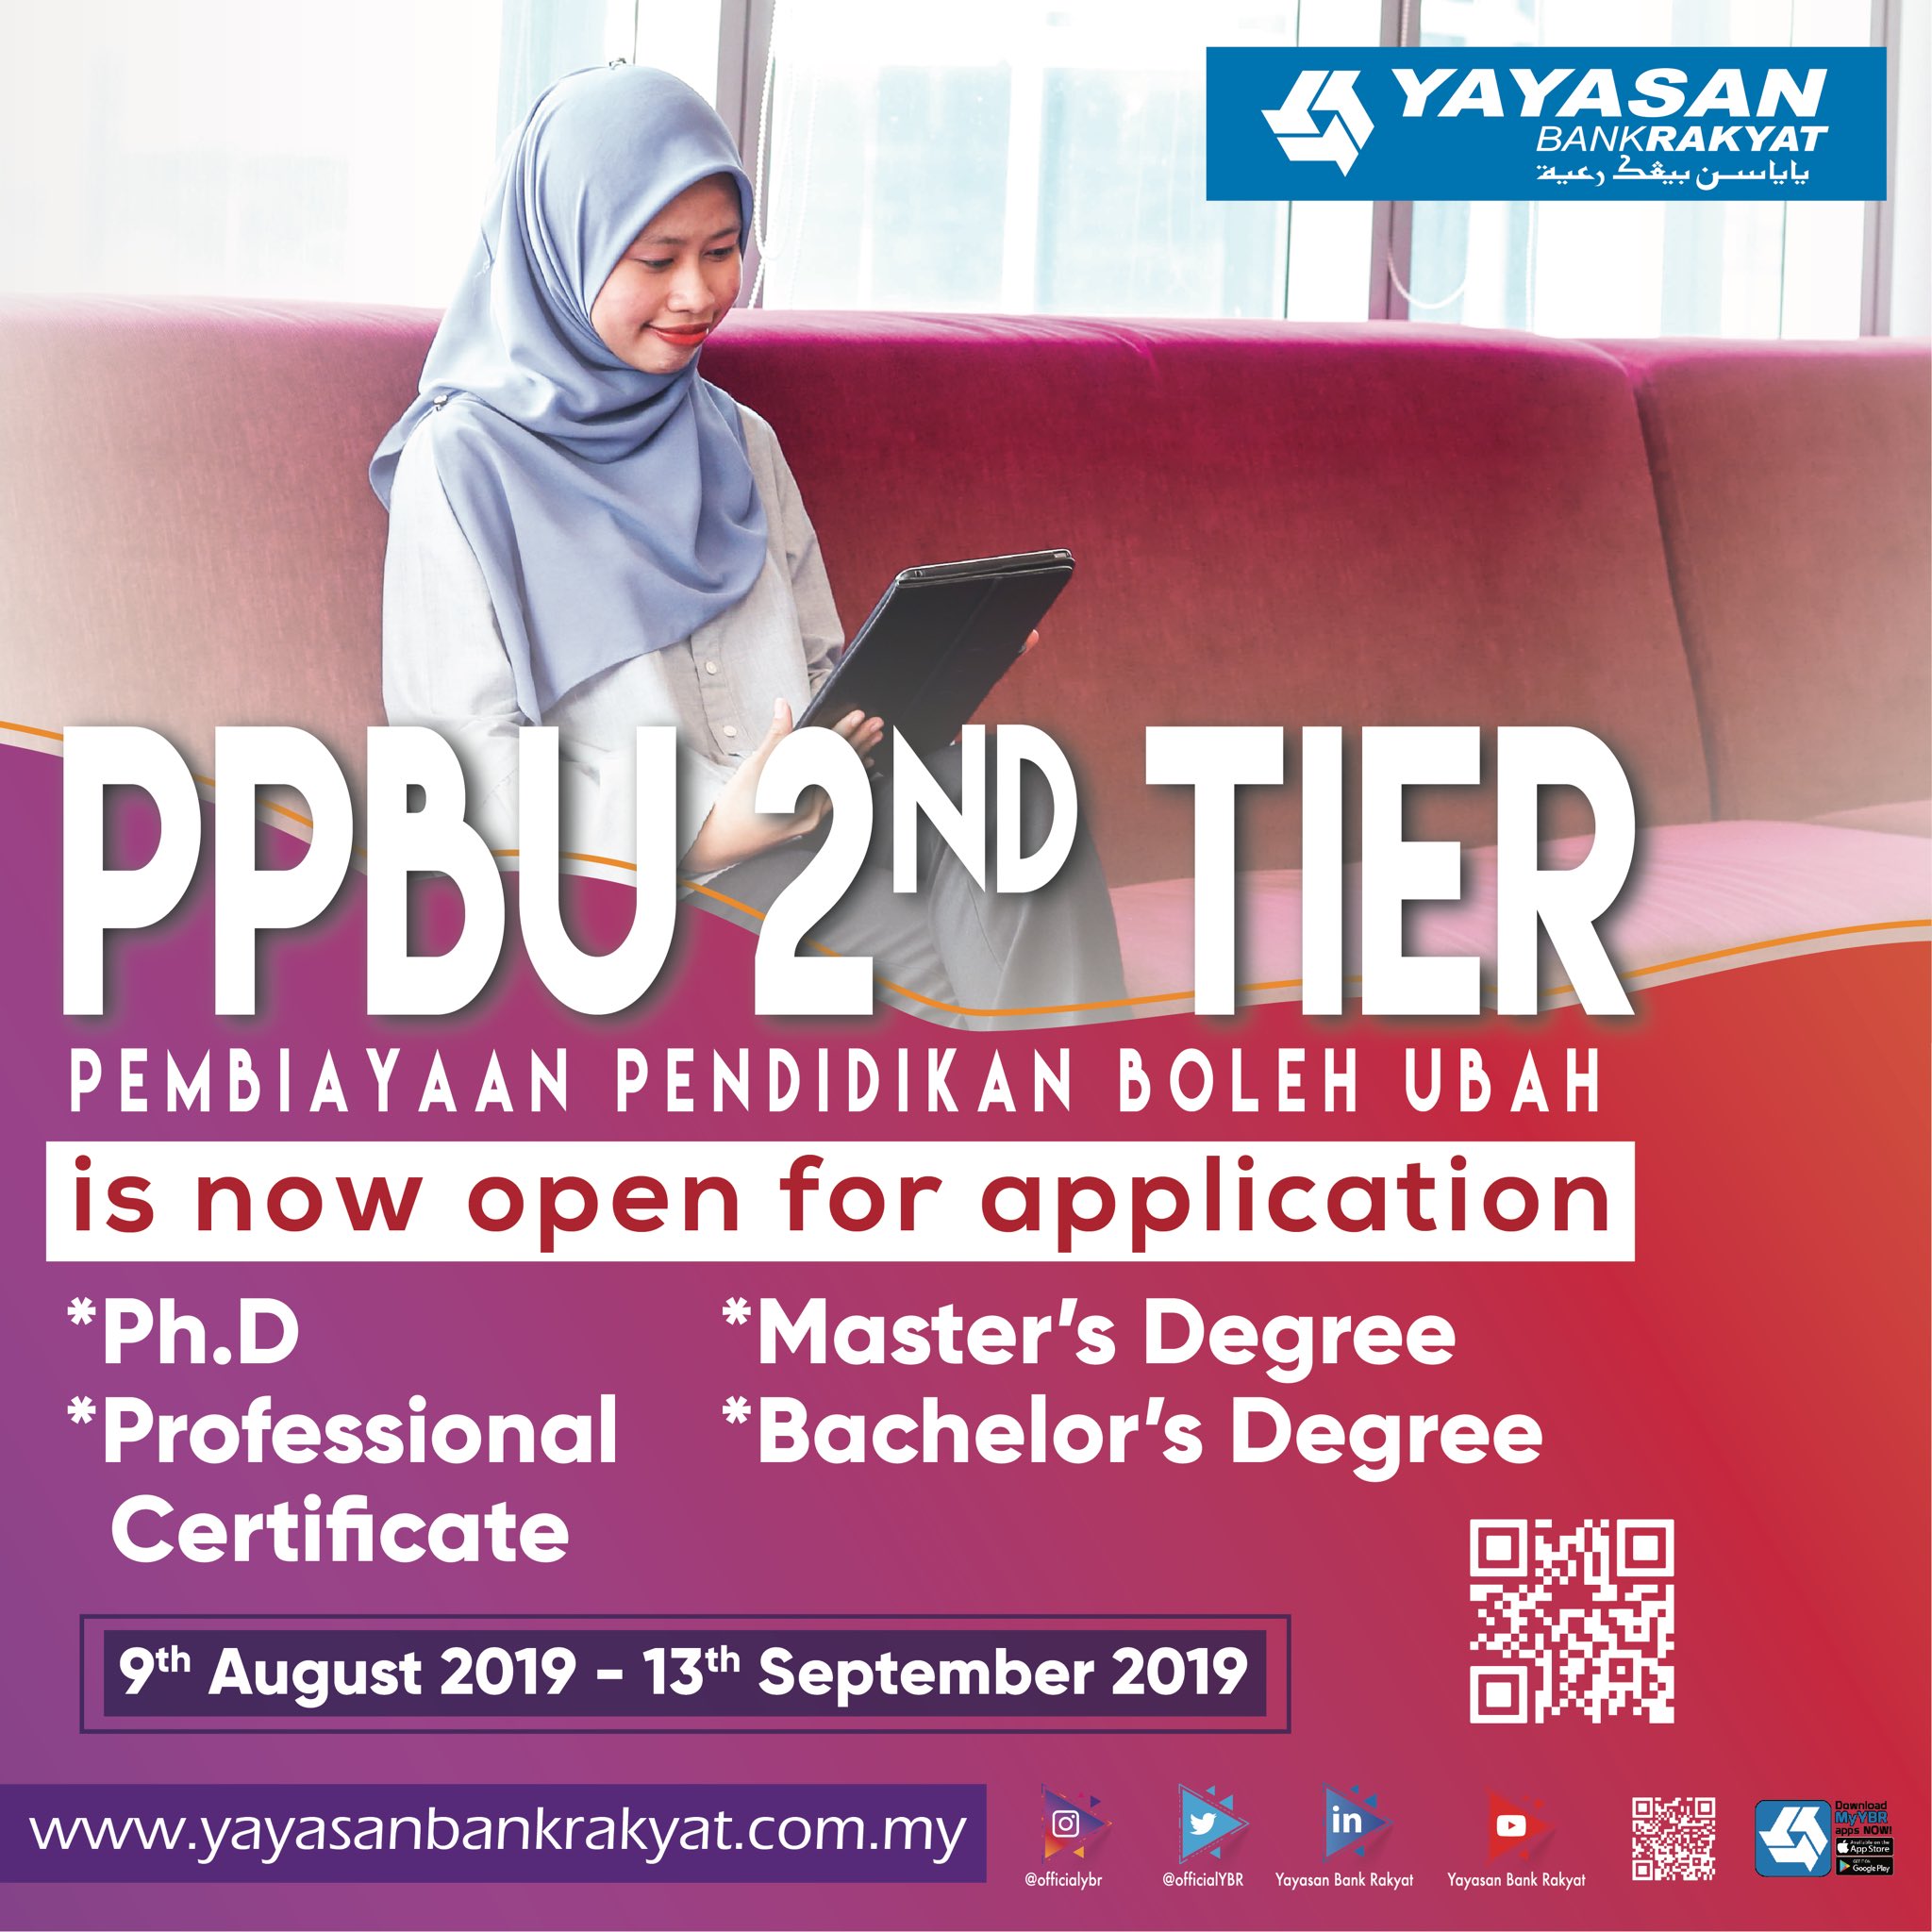 Yayasan Bank Rakyat On Twitter Would You Like To Know How To Apply For Ppbu 2nd Tier You Still Have Time Check Out Our Website For More Info Ybr Your Elite